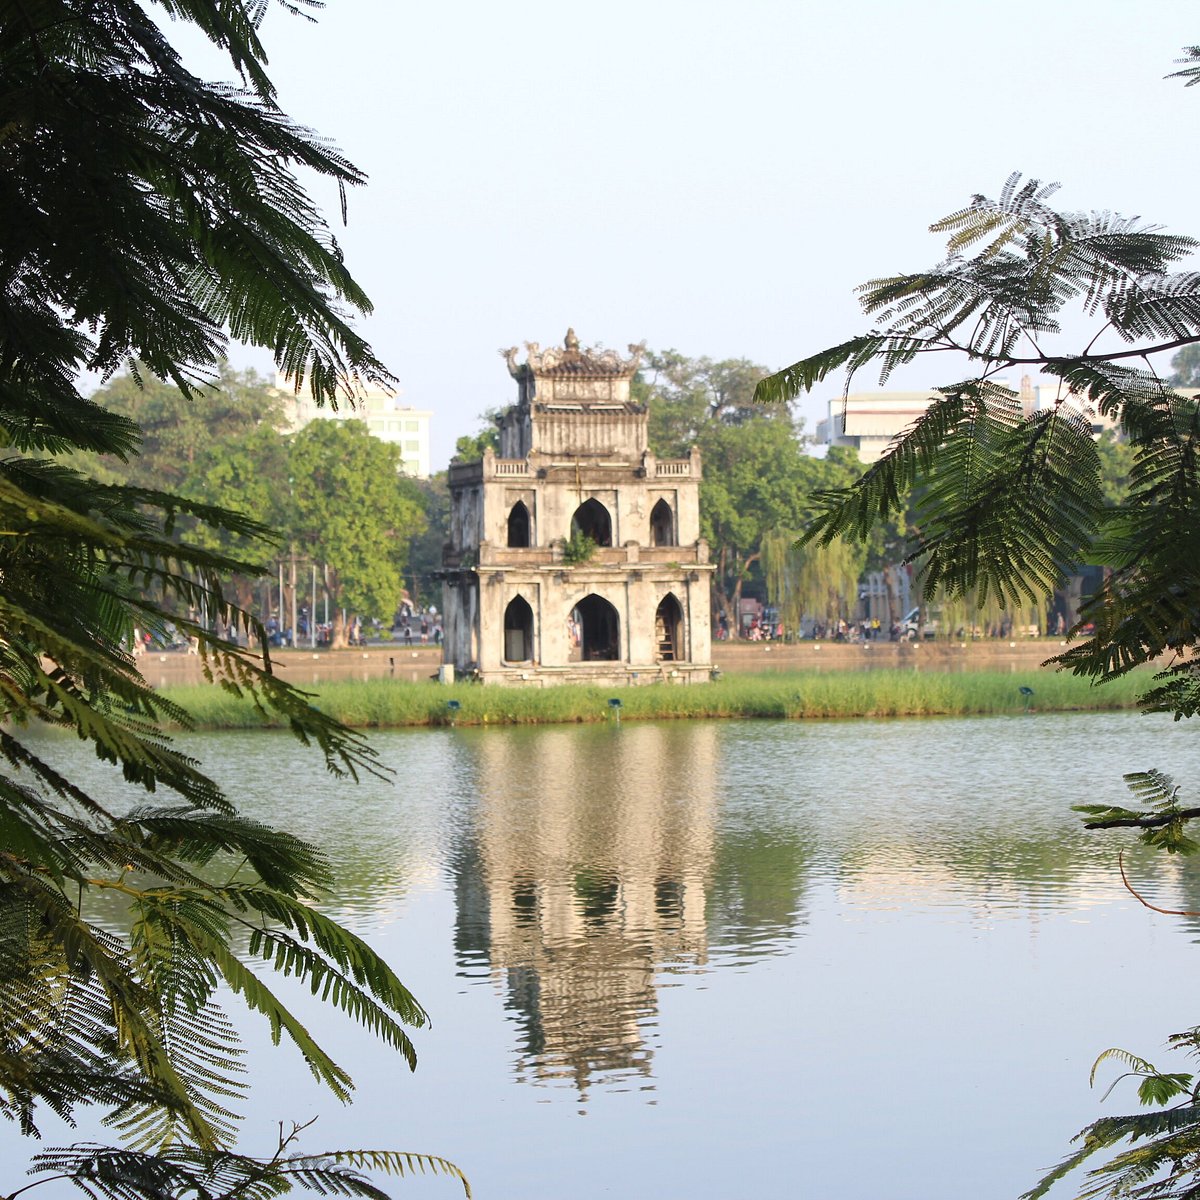 Hanoi Tours Vietnam - Private Day Tours - All You Need to Know BEFORE ...